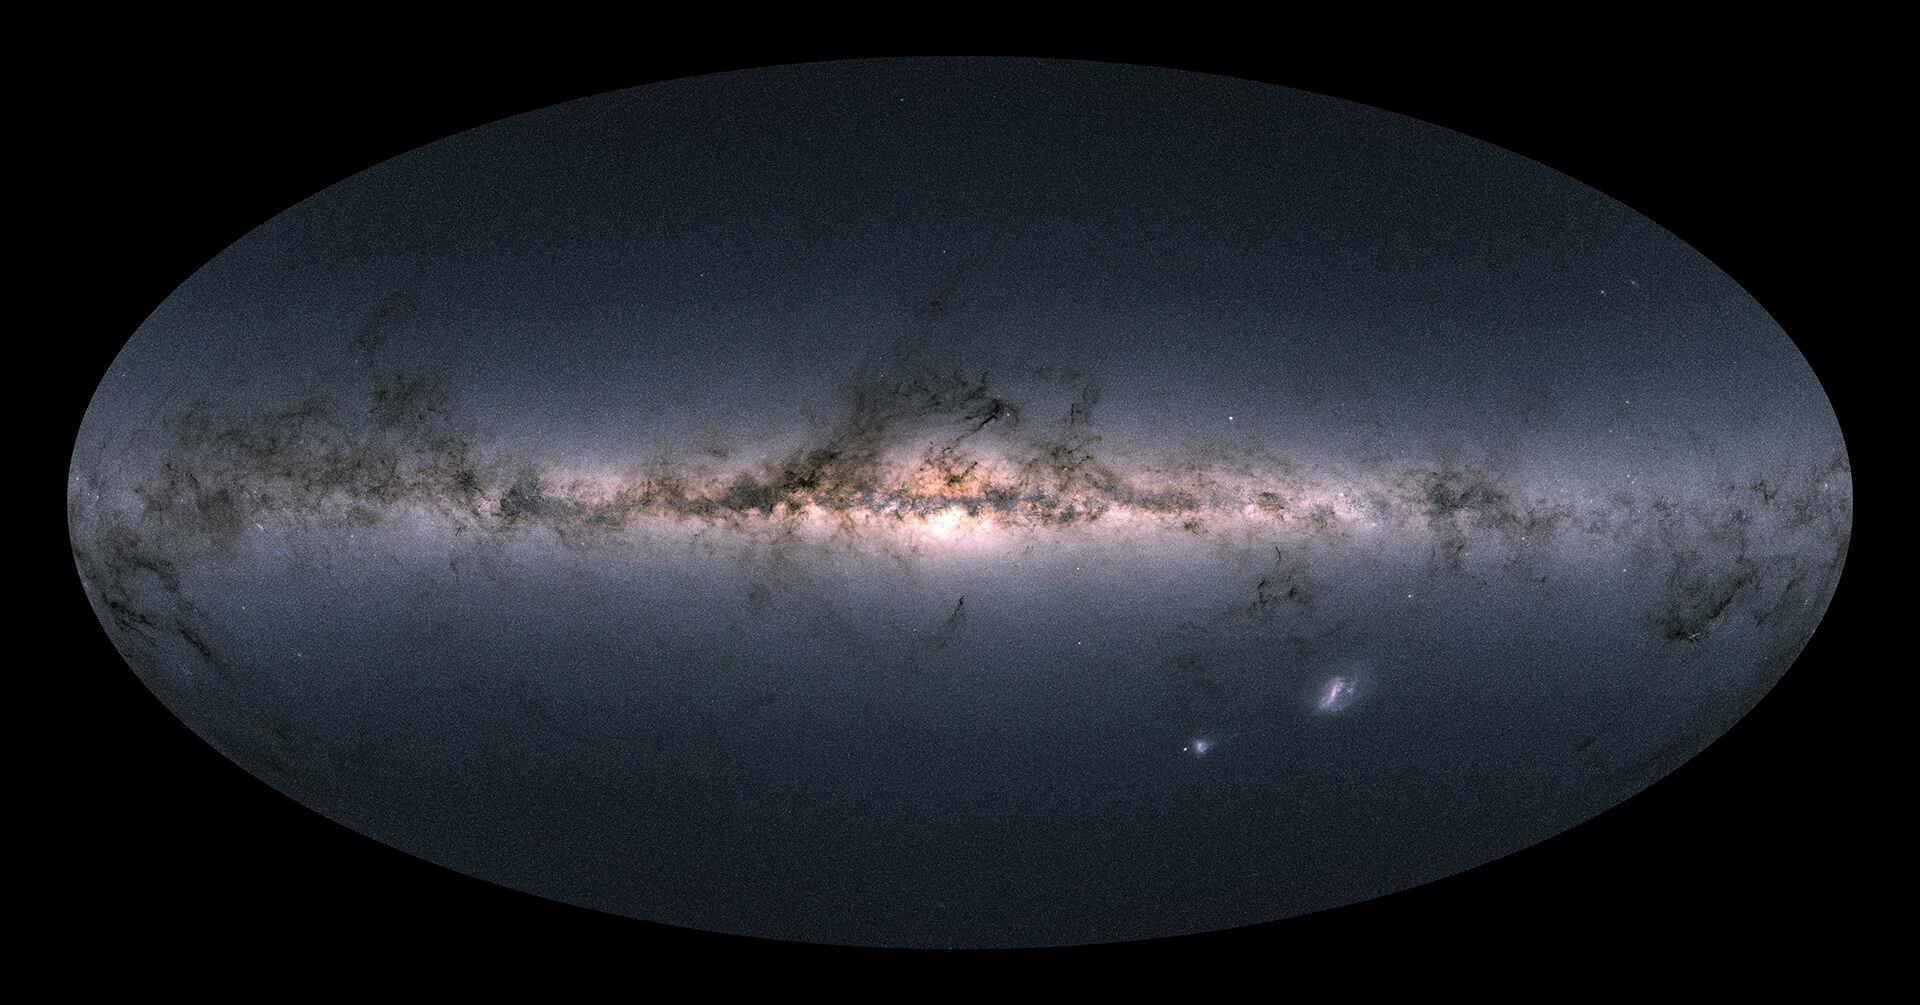 The stars of the Milky Way galaxy.